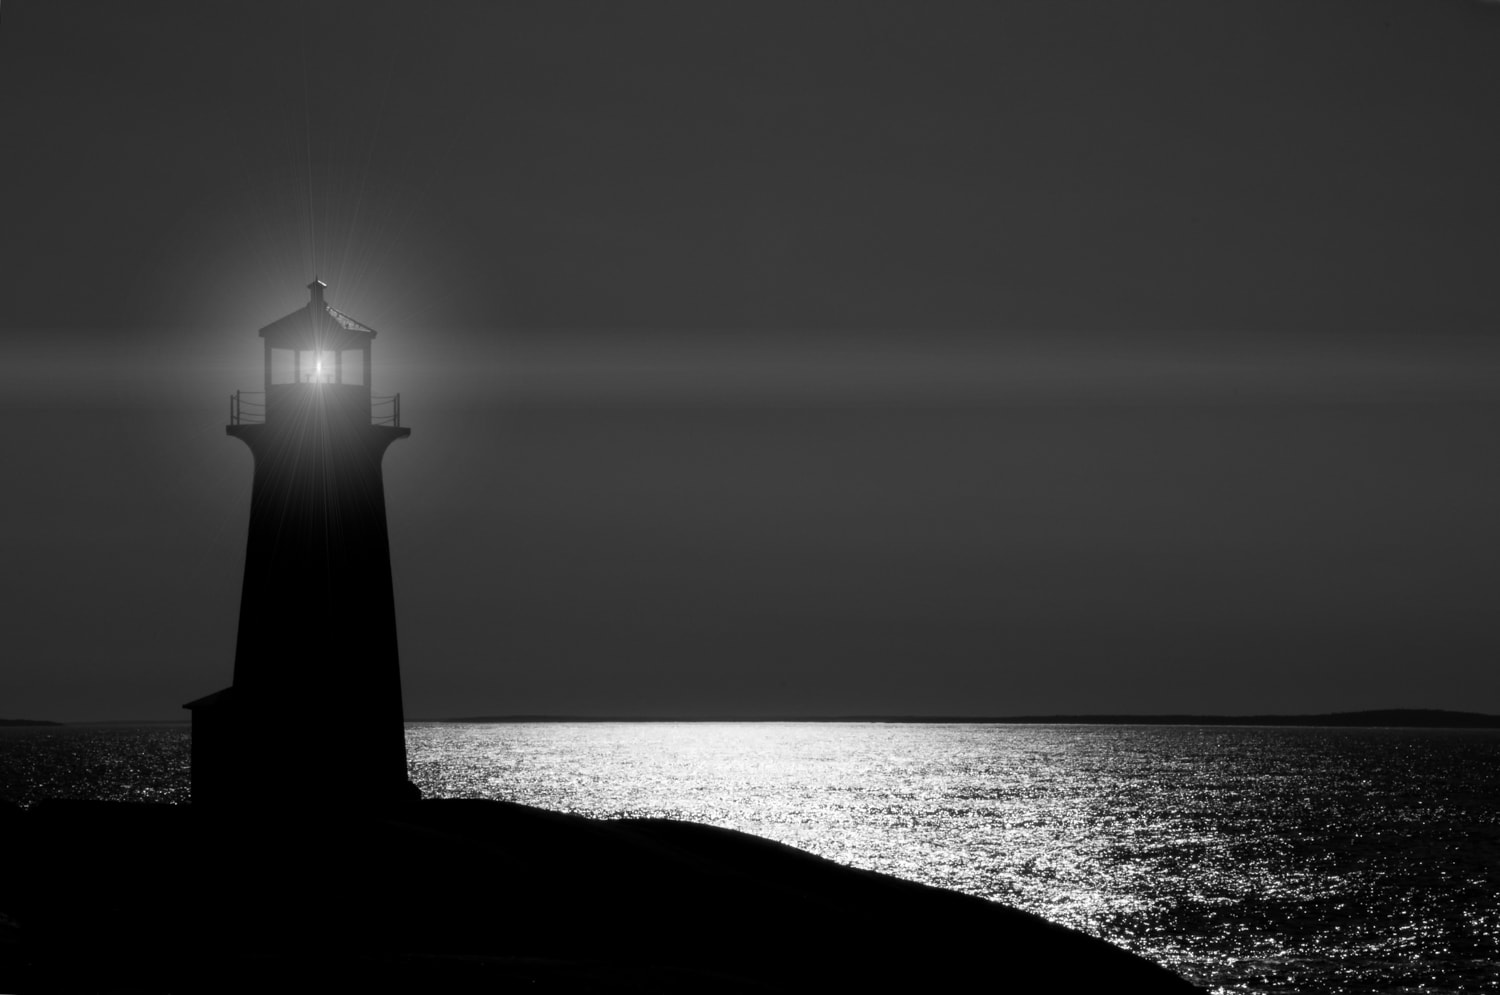 The Peggy's Cove lighthouse at night in silhouette in Nova Scotia.